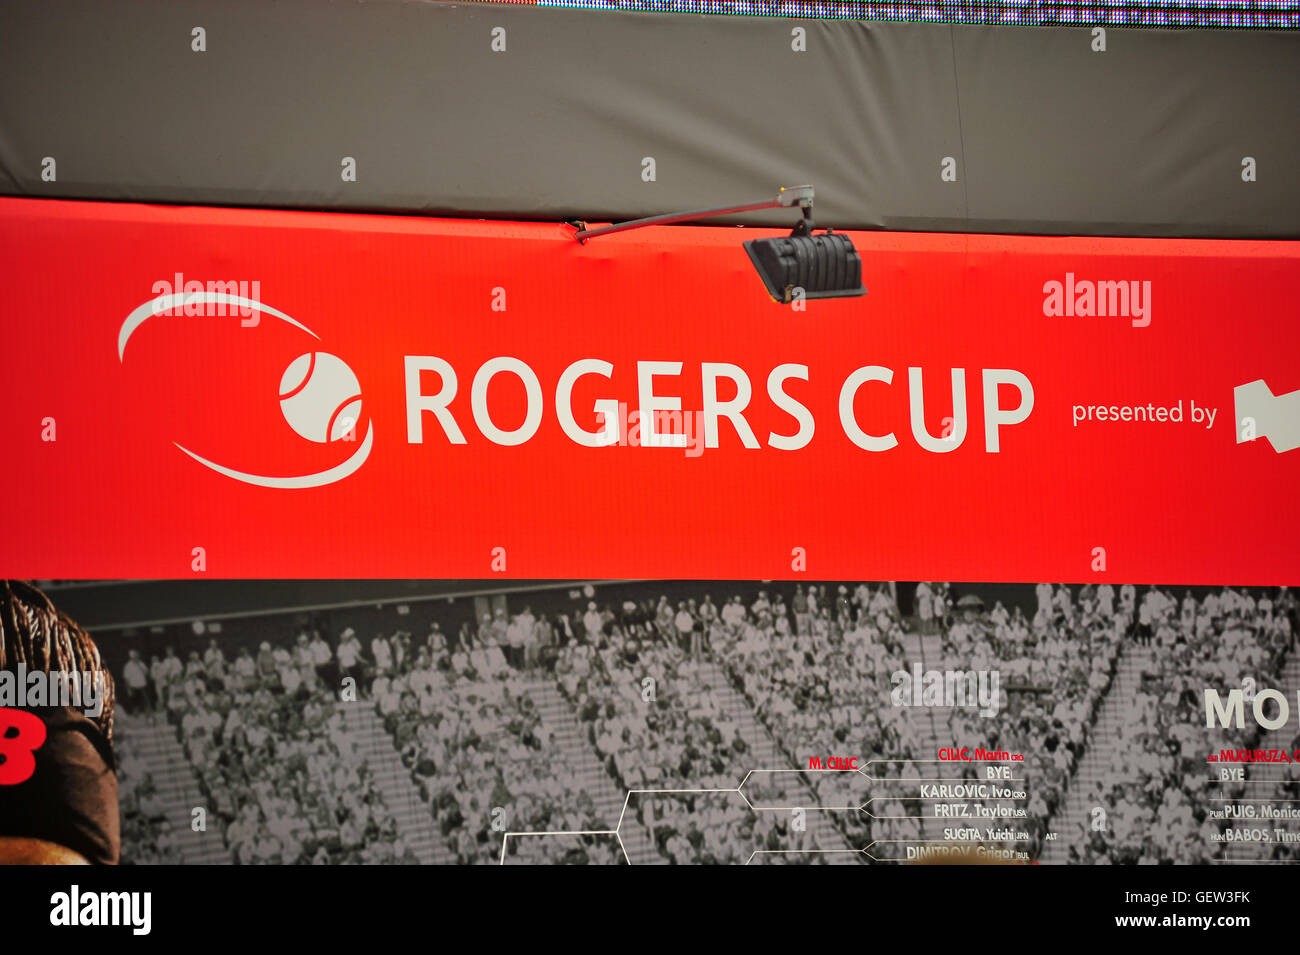 The 2016 Rogers Cup held in the Toronto Aviva Centre in Canada. Stock Photo